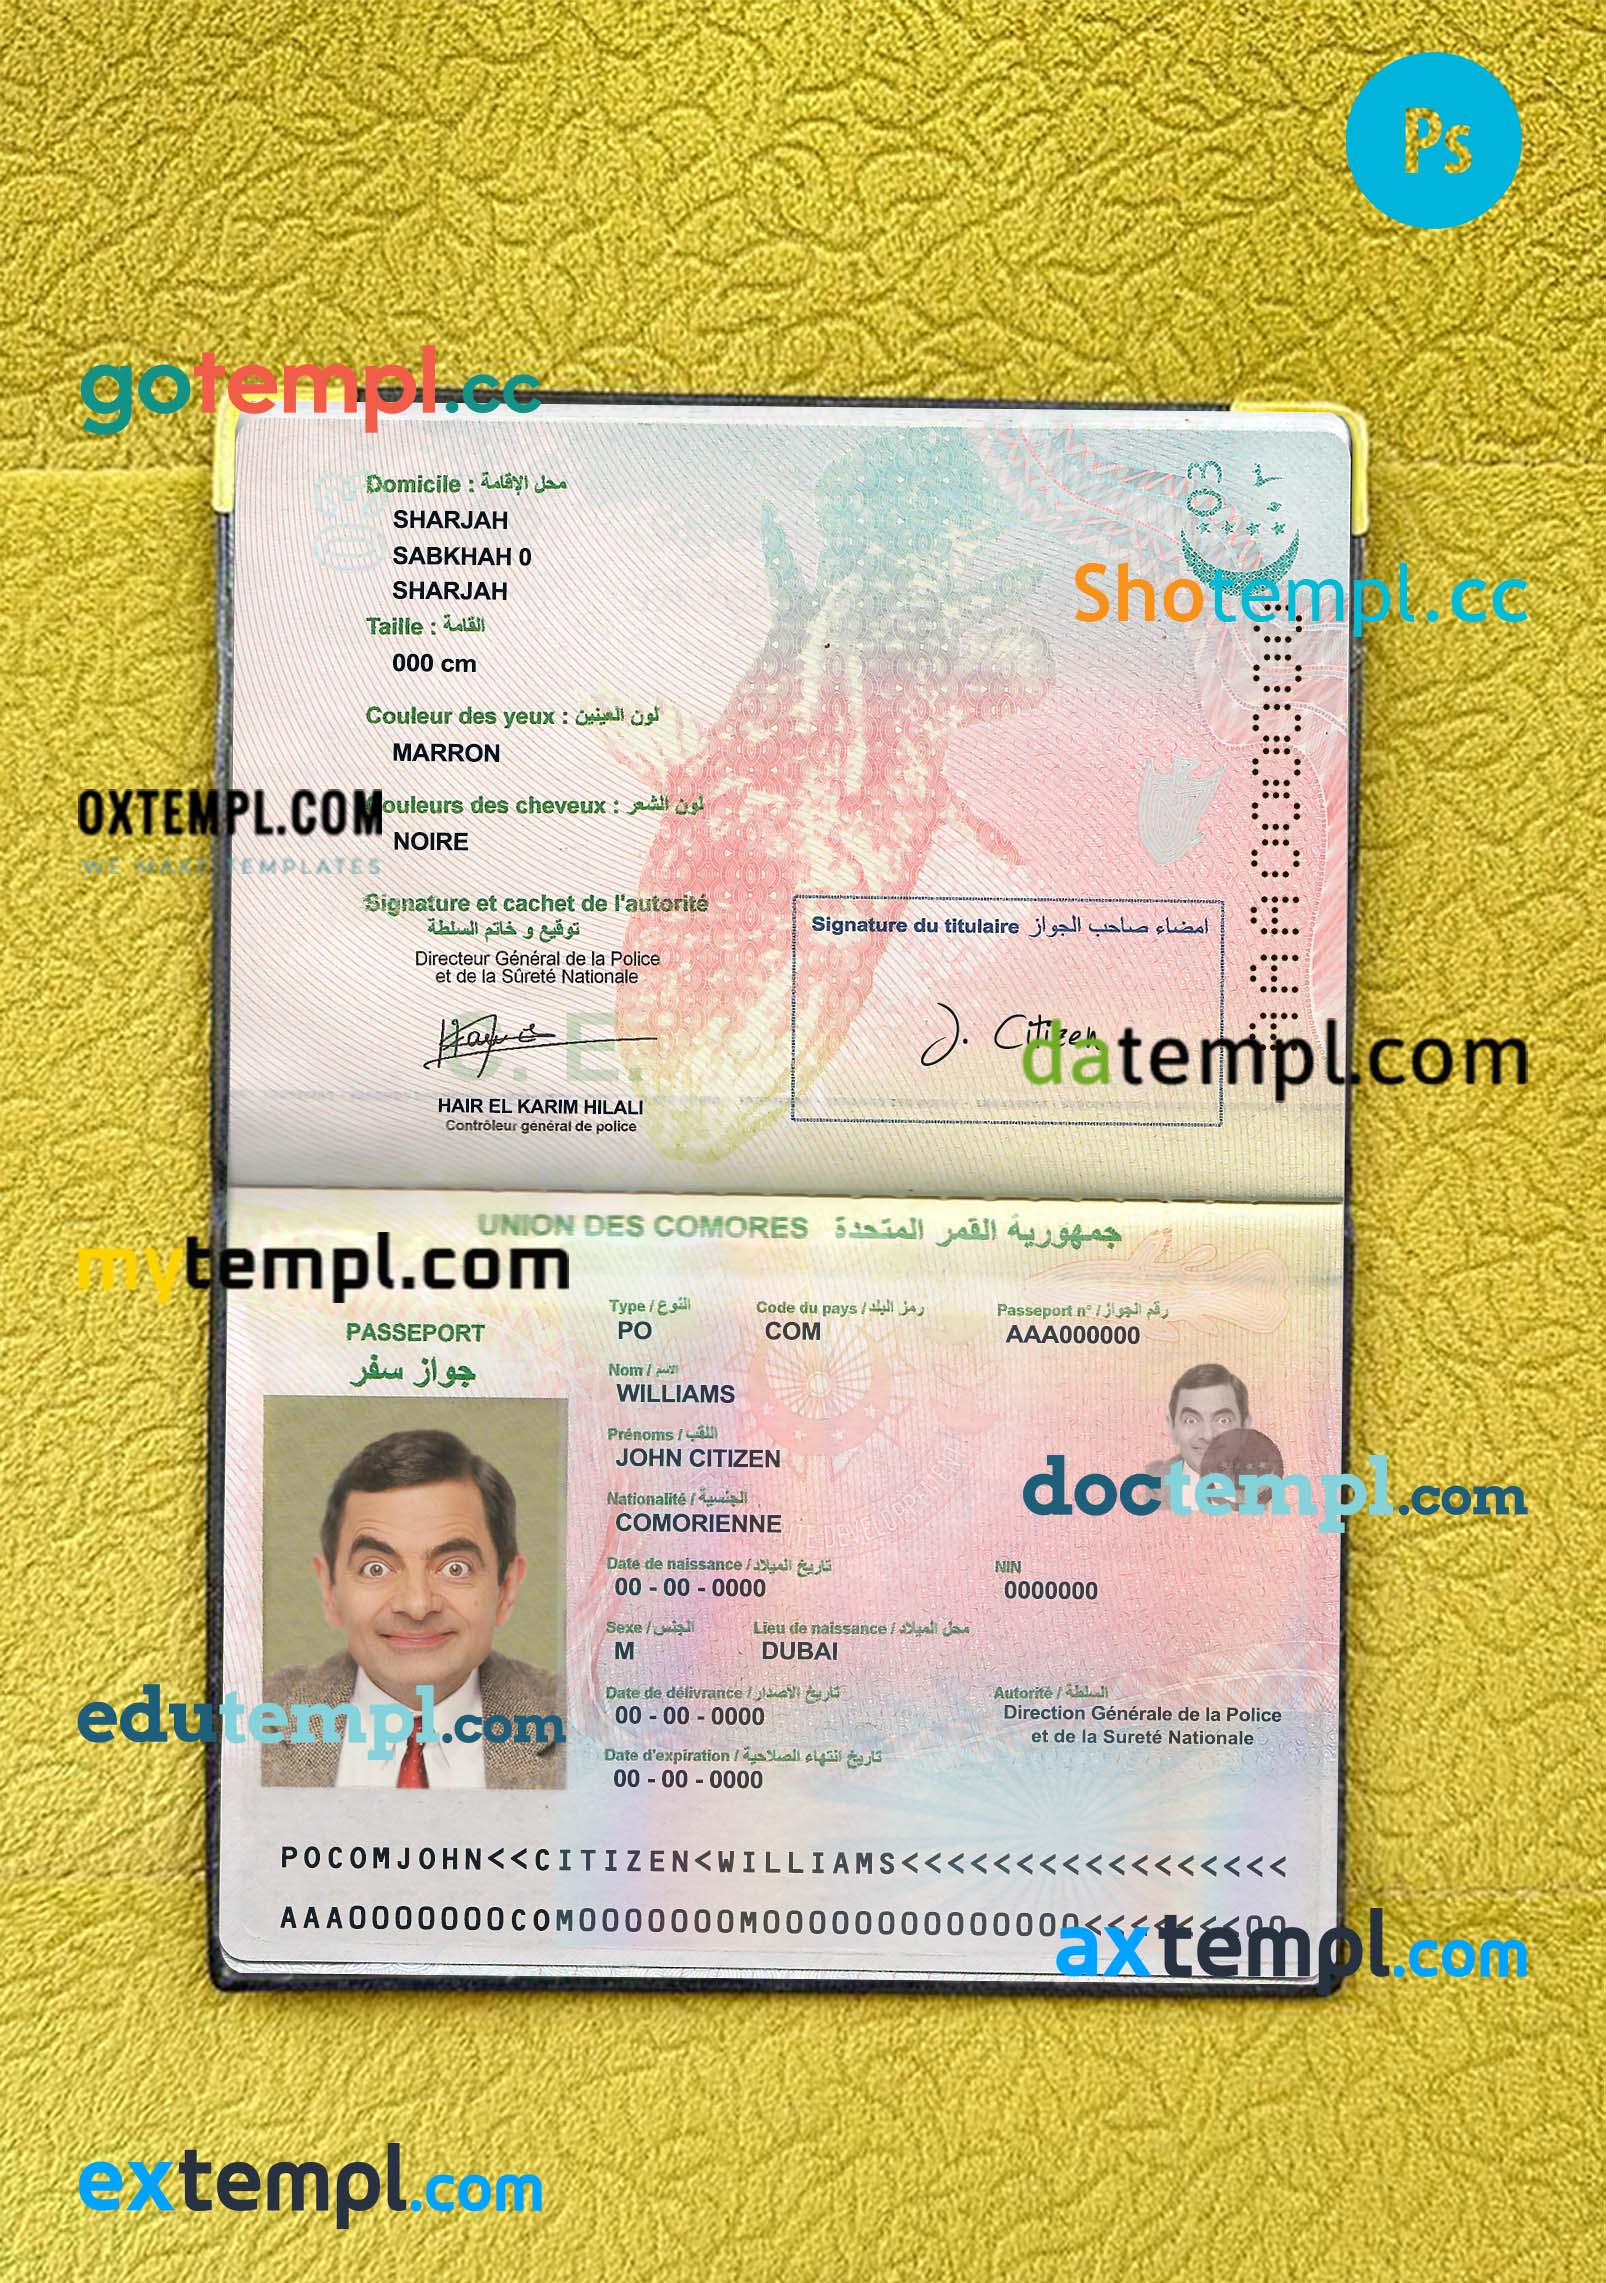 Union Des Comores passport PSD files, scan and photo look templates, 2 in 1